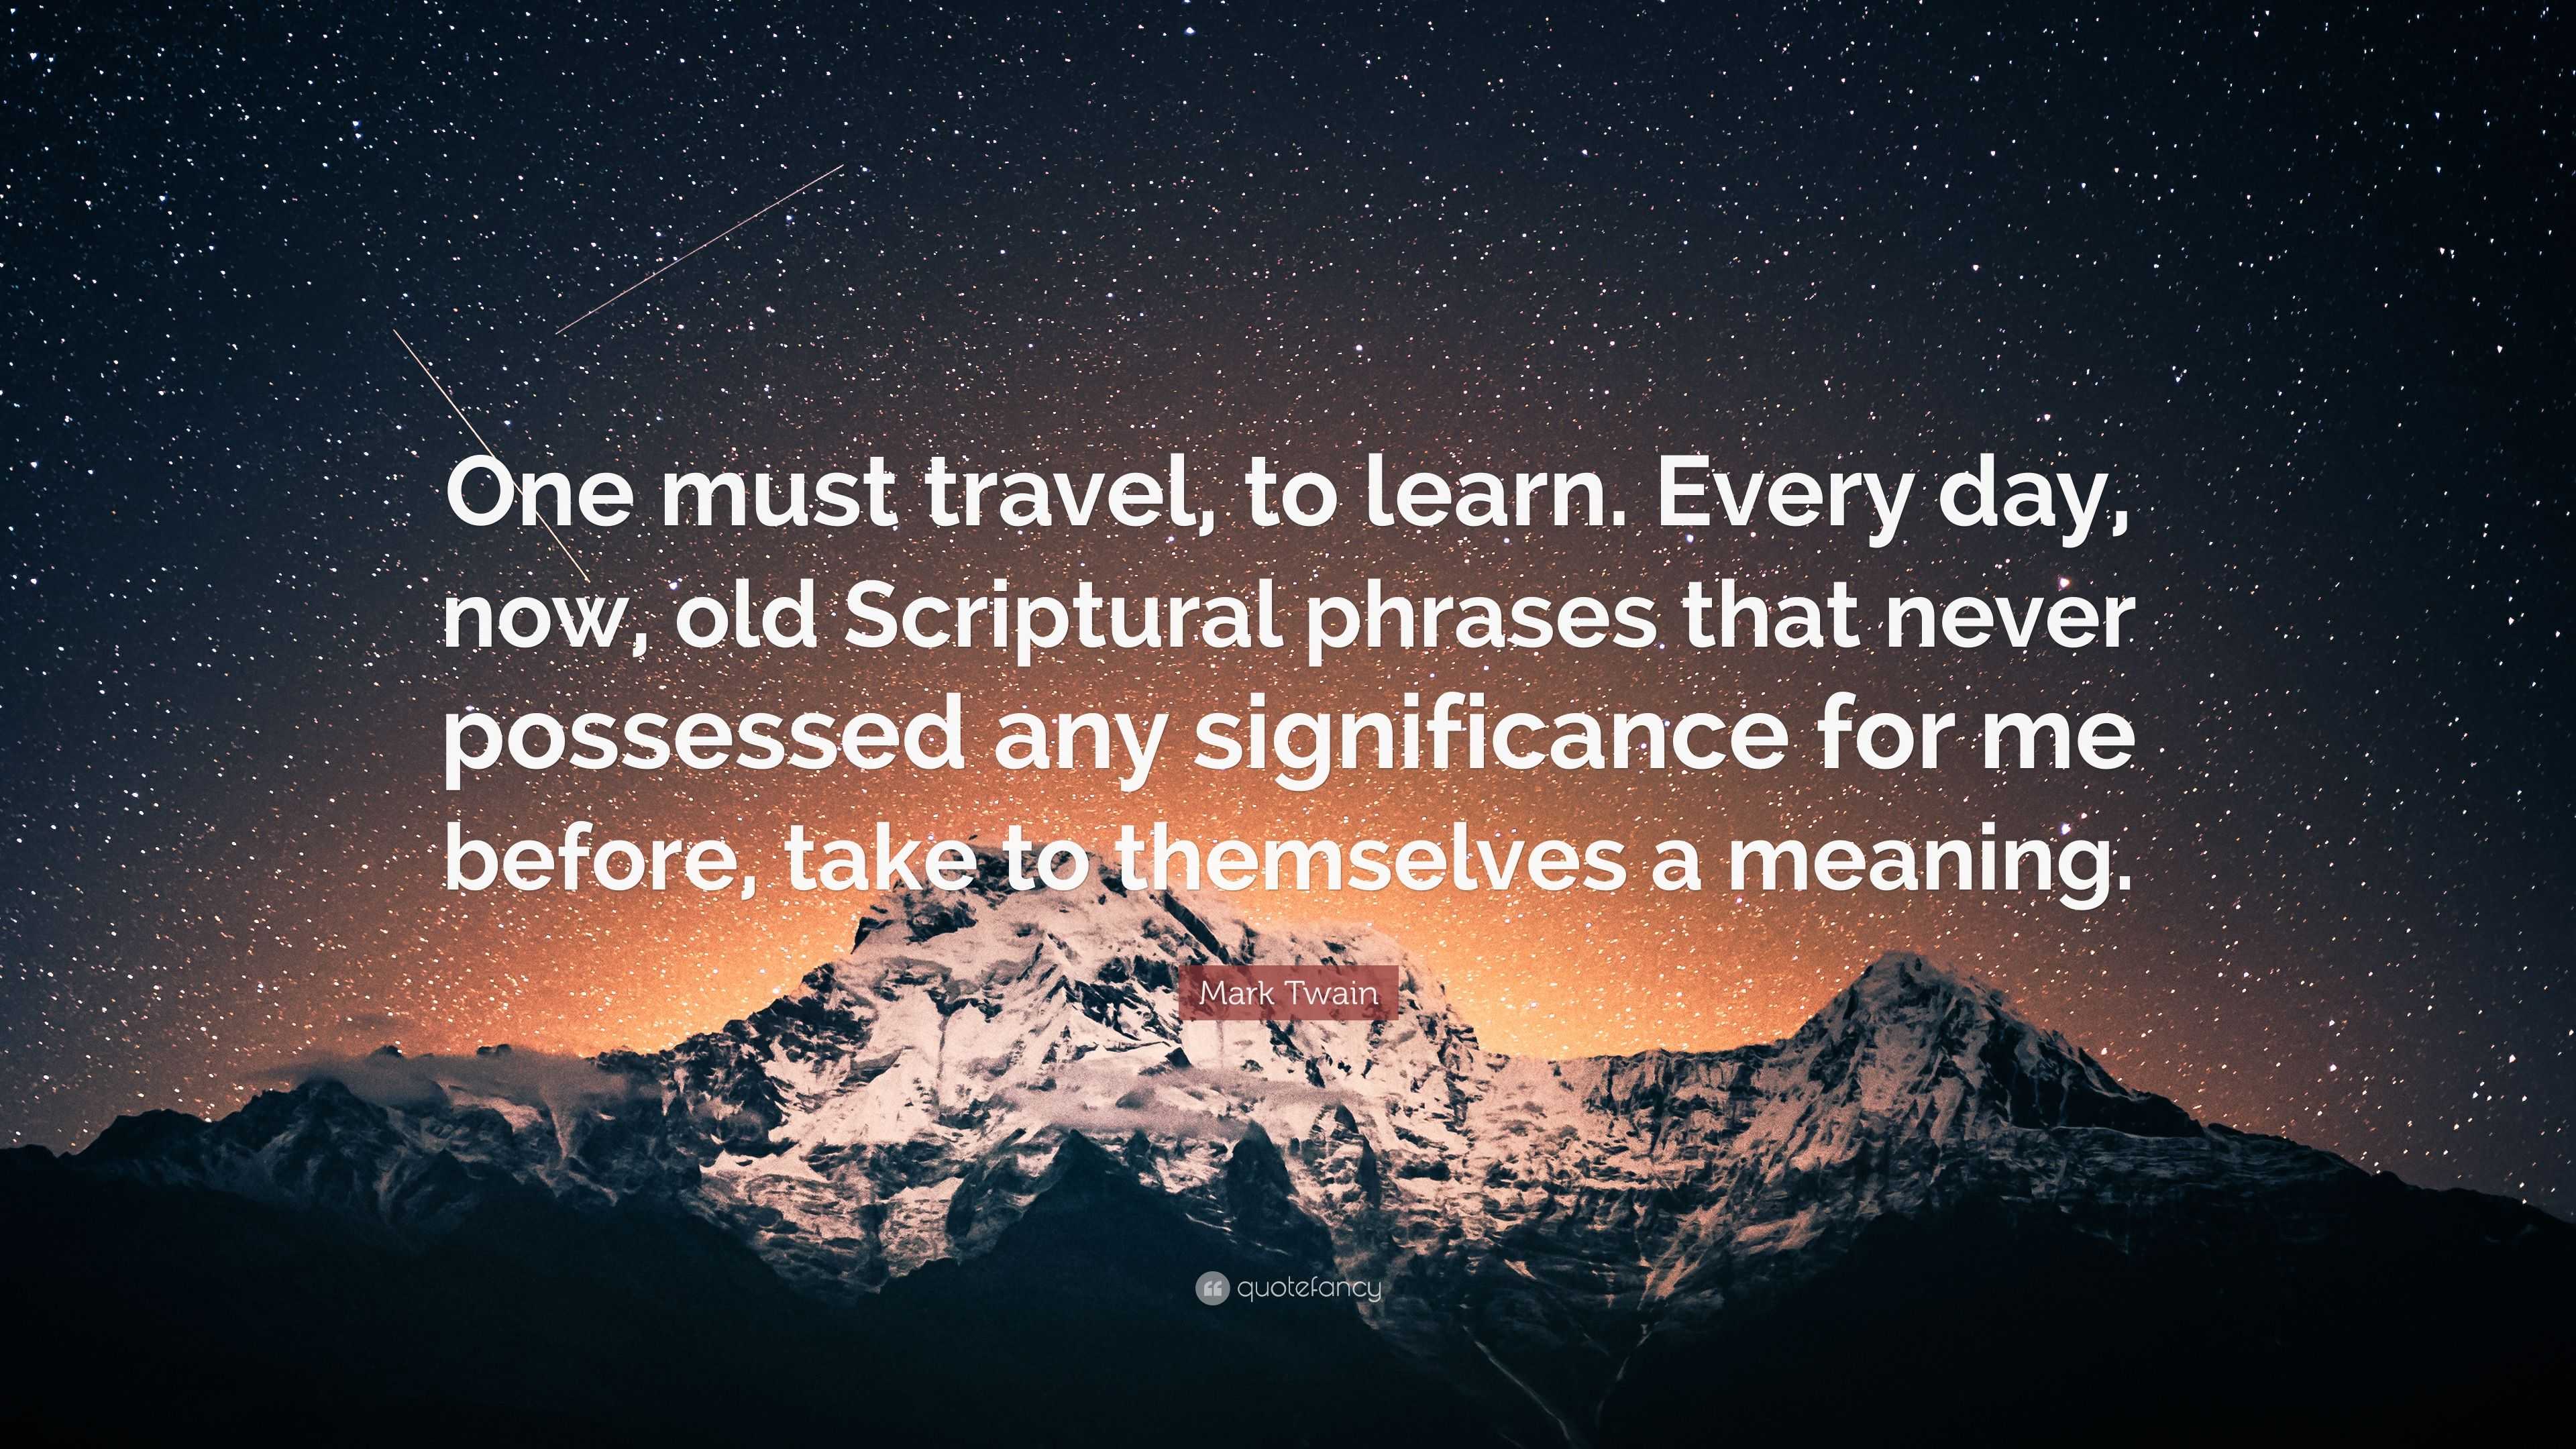 mark twain travel quote meaning - Clare Majors